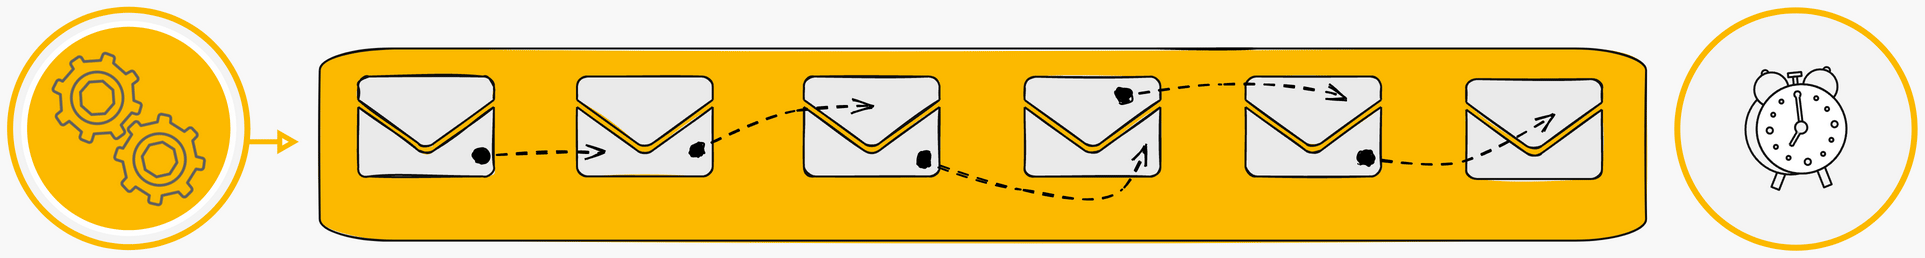 Graphic showing a basic email set up